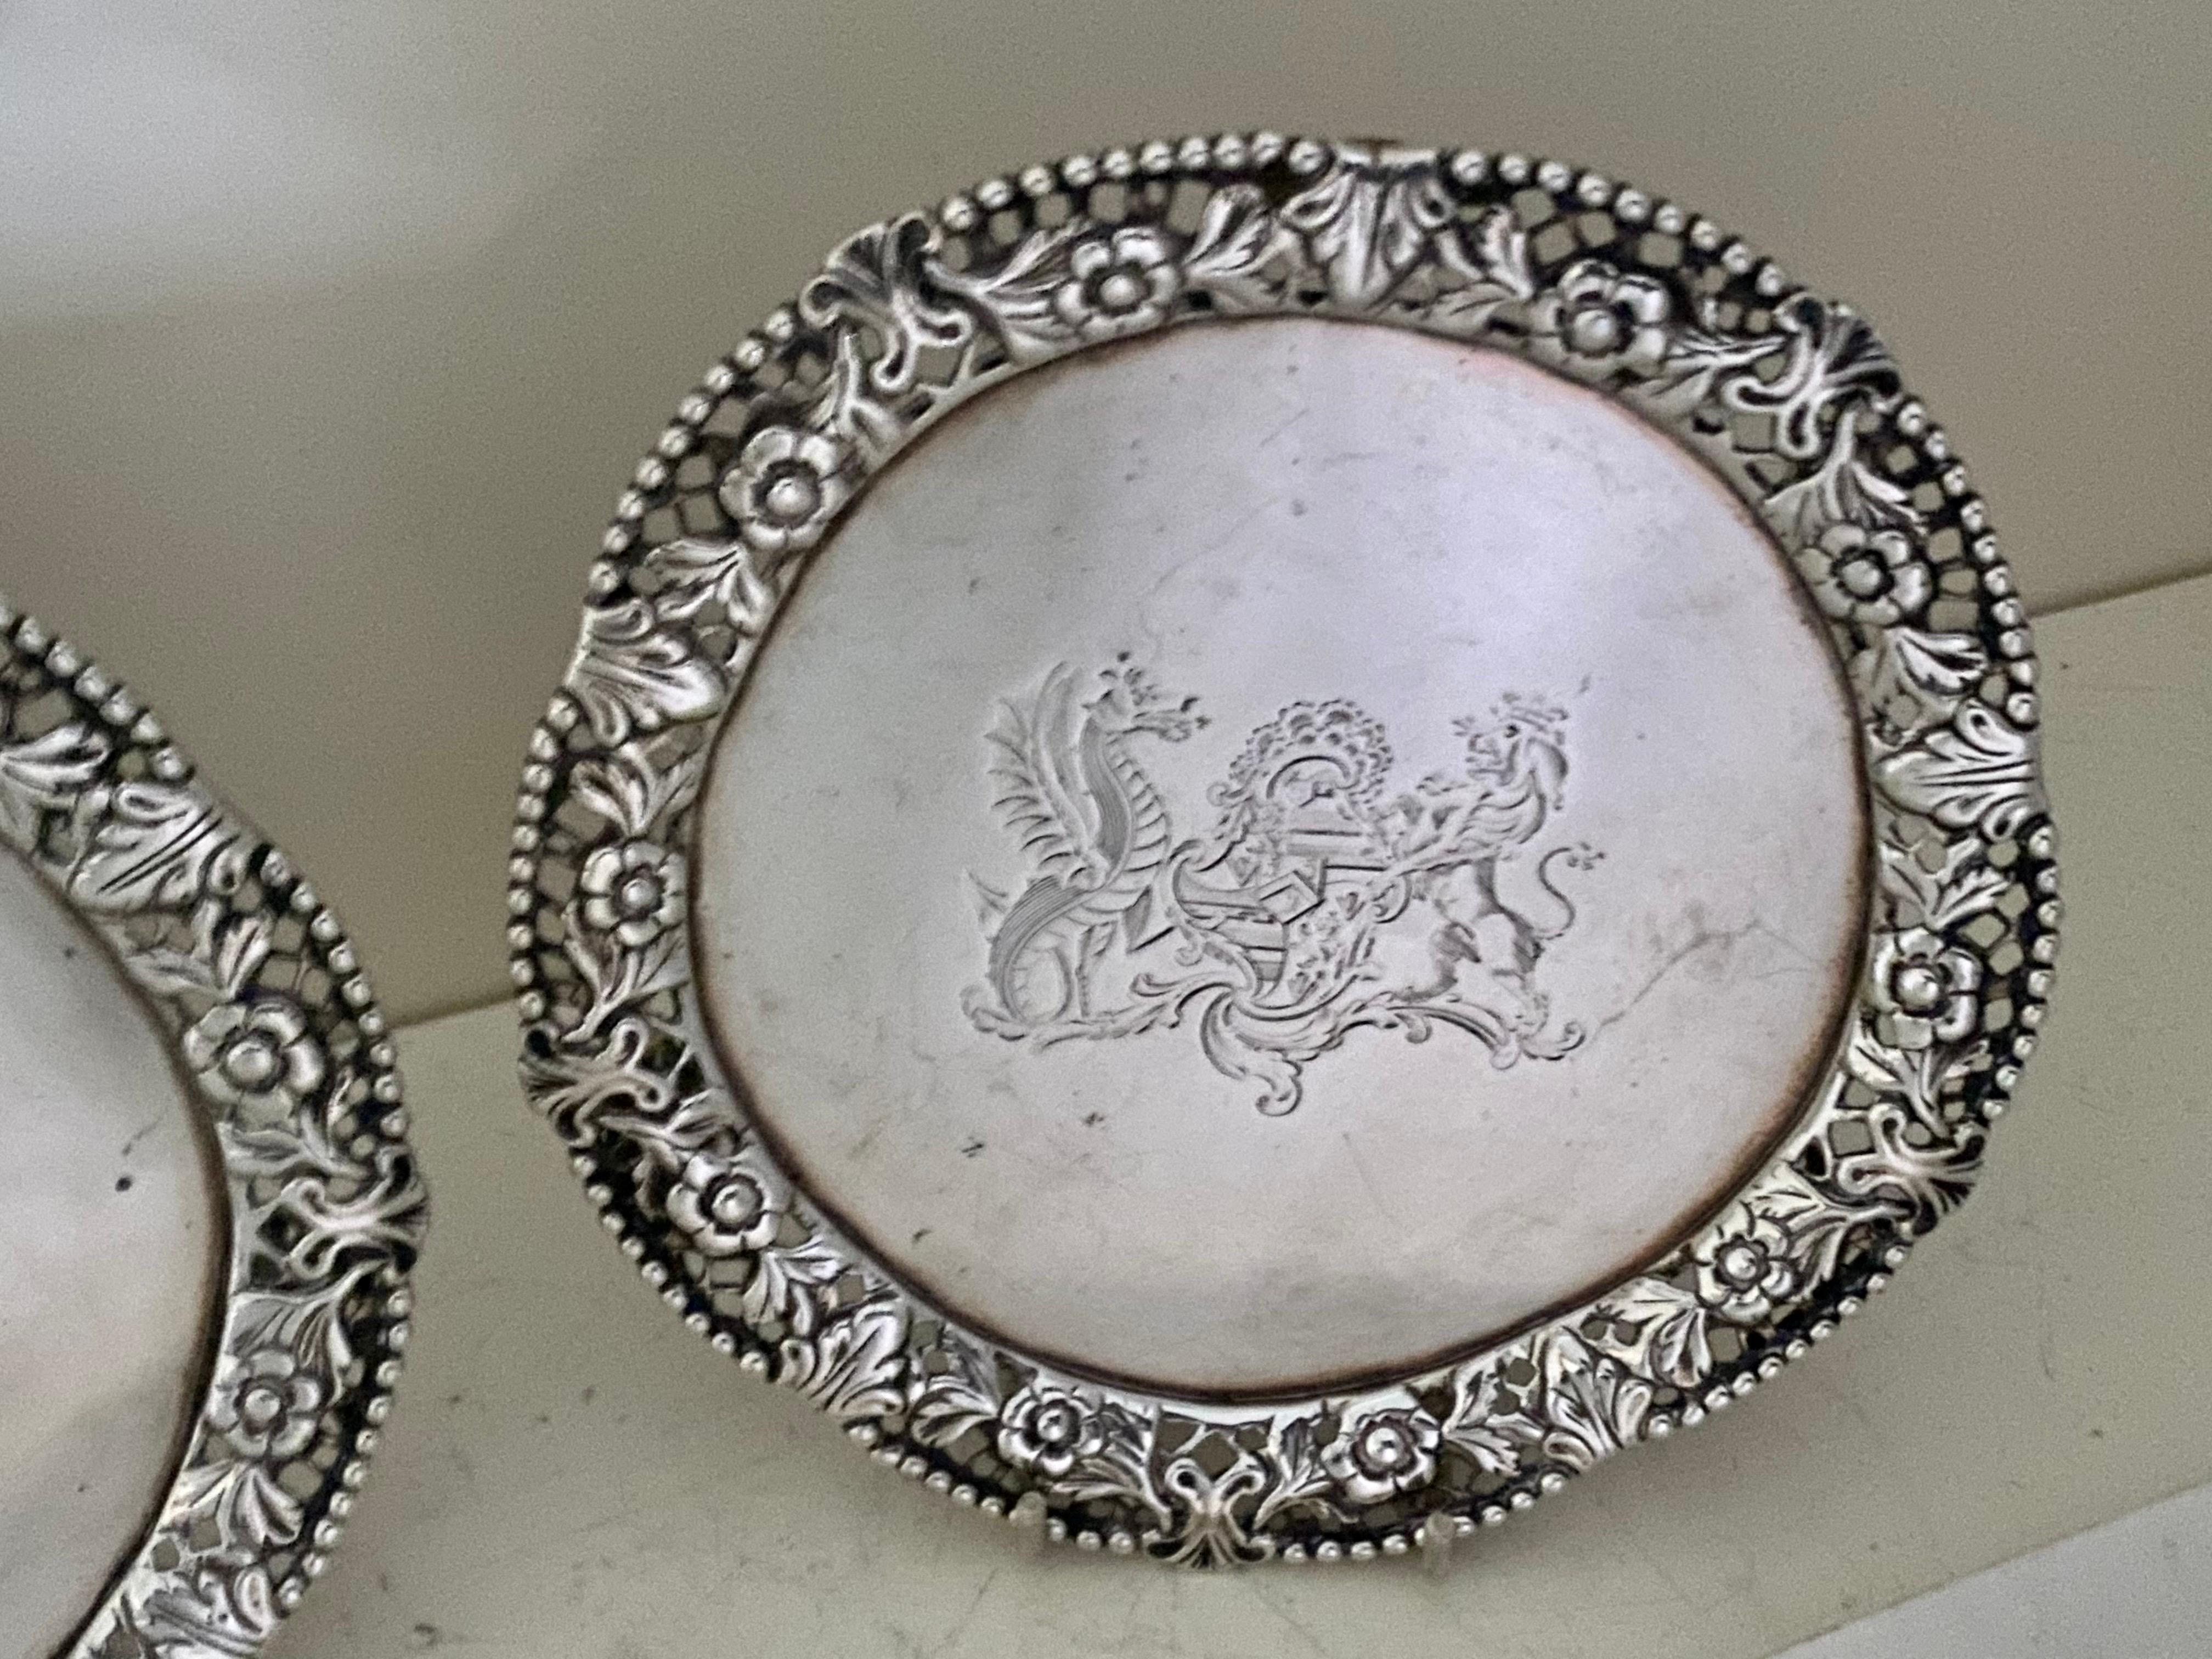 A very fine pair of George IV shaped circular salver, waiters with a cast gallery, Standing on three openwork, foliate feet, the centre engraved bearing the coat-of-arms of Lady Maria Egerton of Alton. within a cast and applied gallery with an